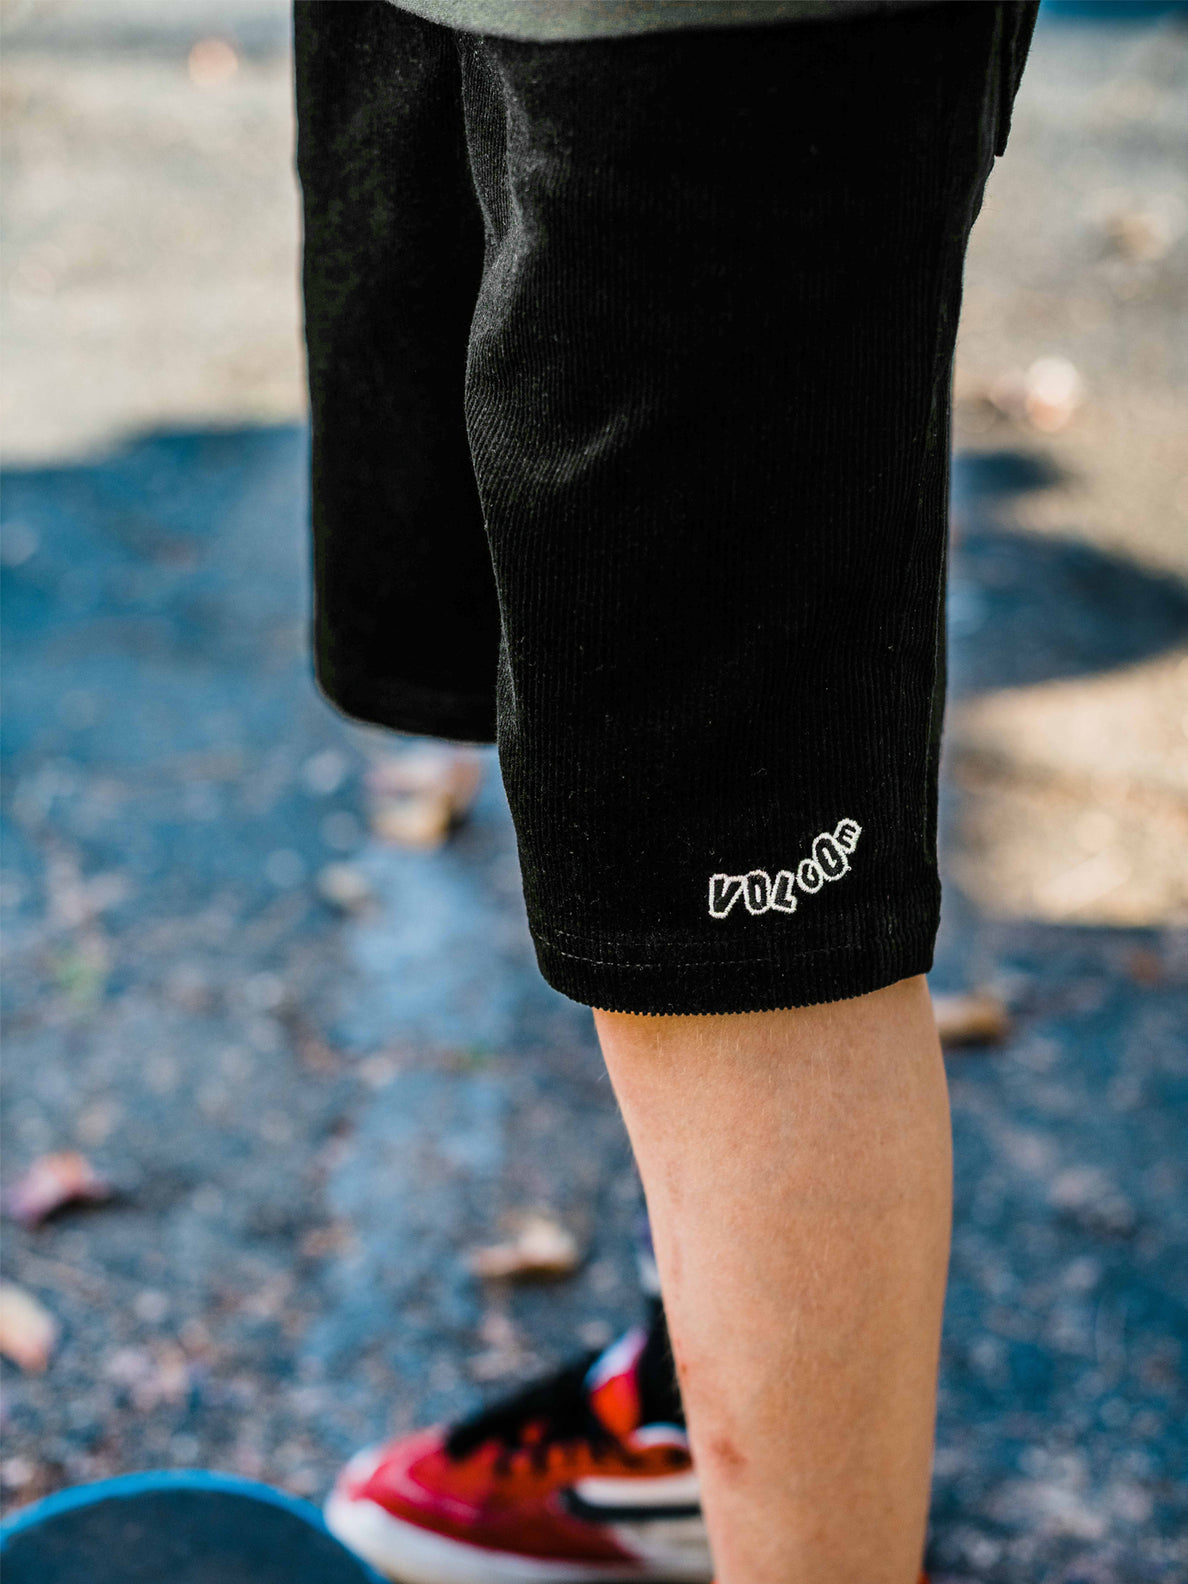 Big Boys Outer Spaced Elastic Waist Shorts - Black Combo